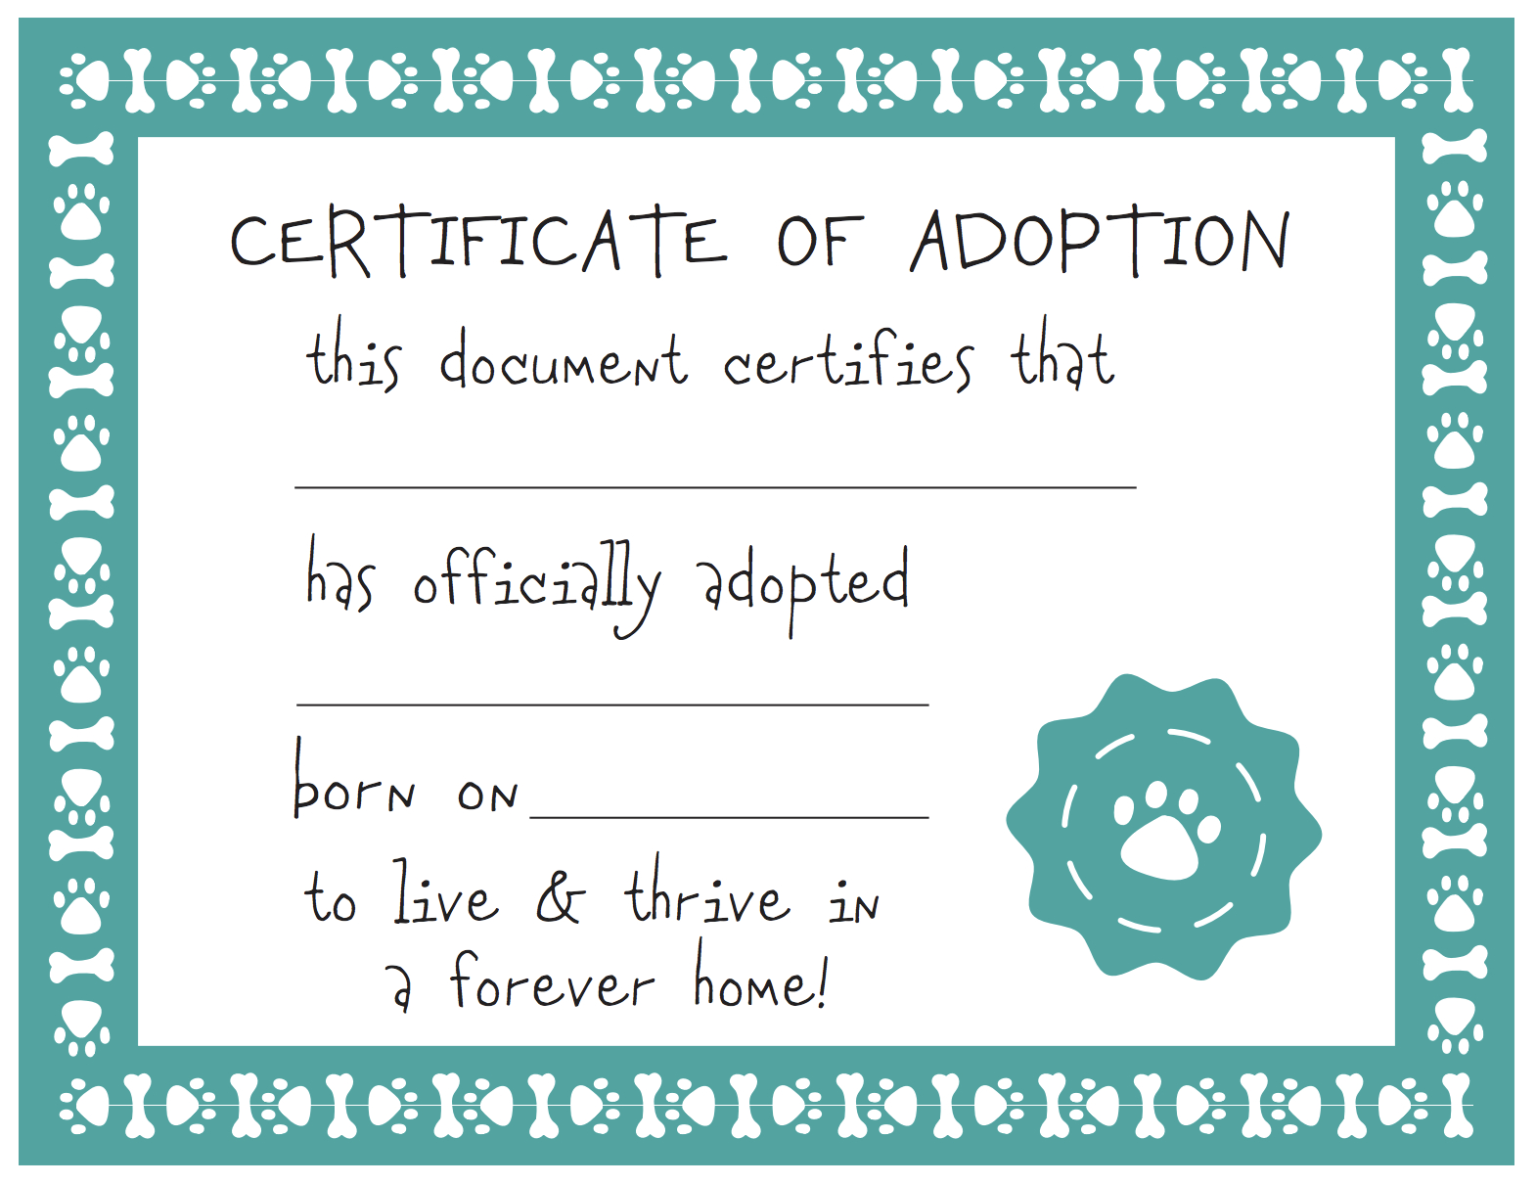 puppy-adoption-certificate-free-printable-printable-world-holiday